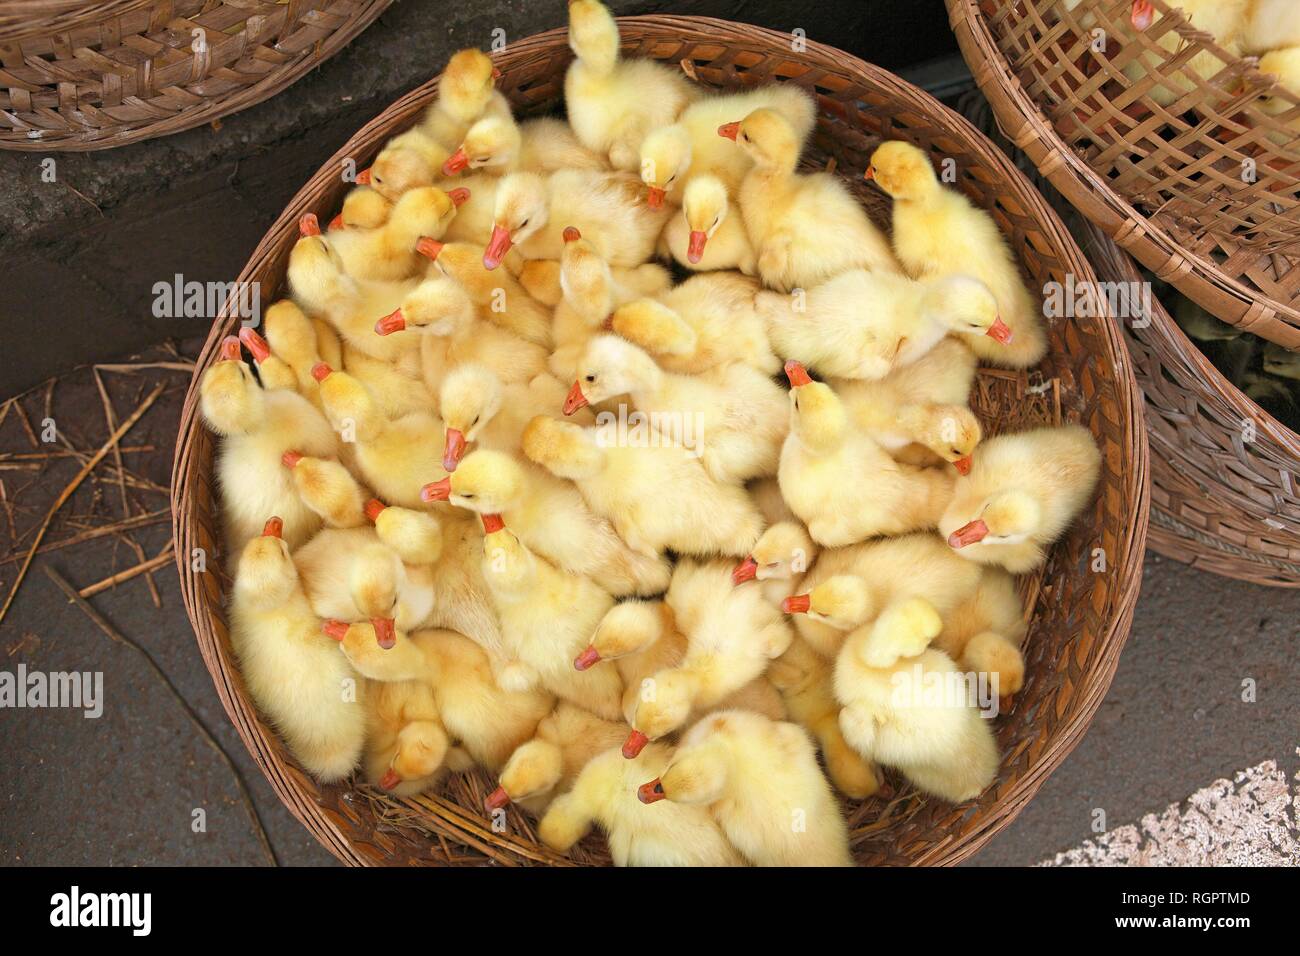 Chickens for sale, street market in Fu Sheng, Chongqing Province, China Stock Photo